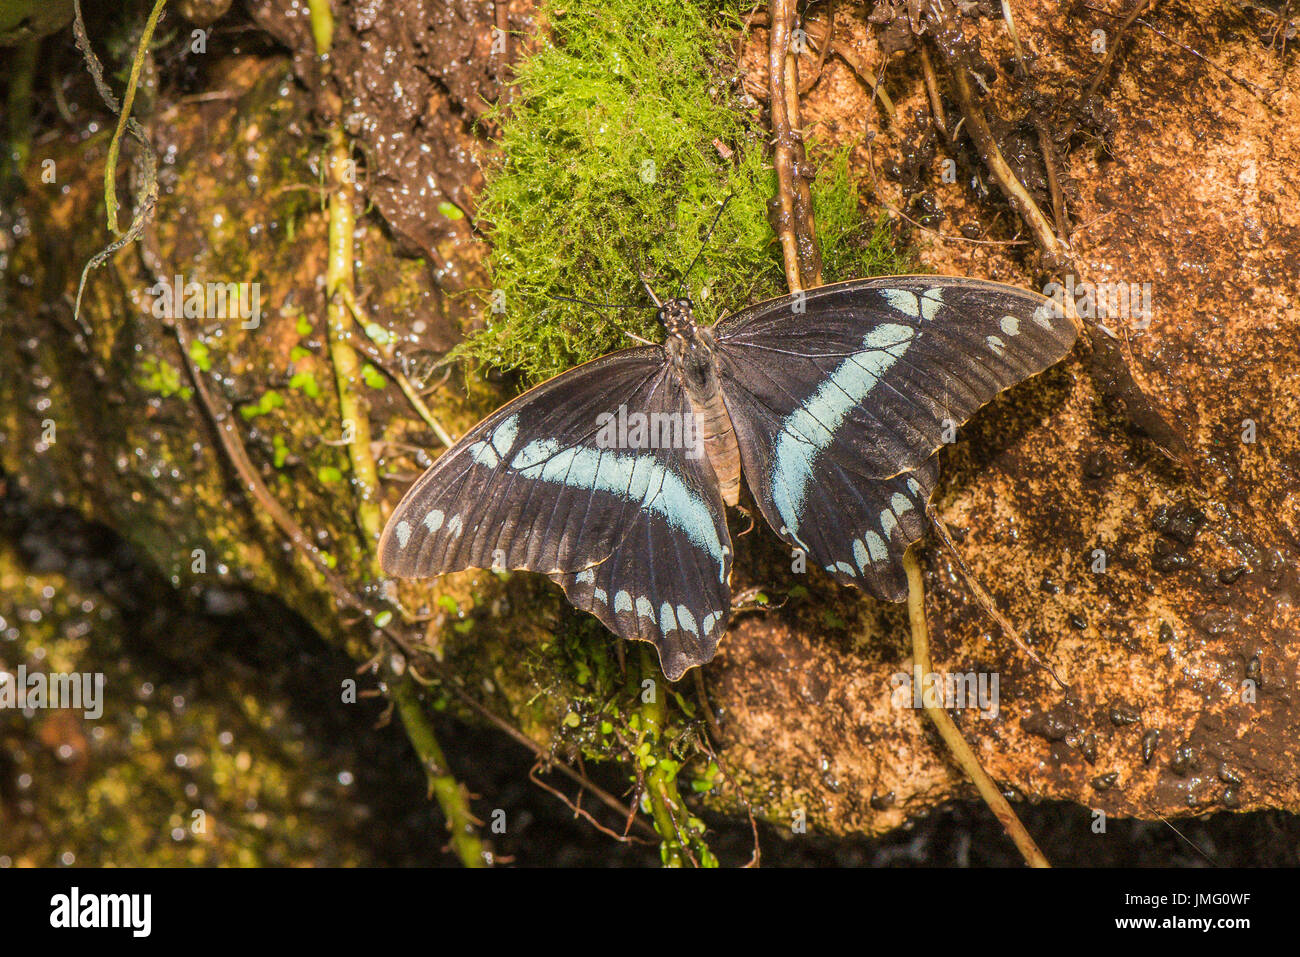 A resting Narrow-banded Swallowtail butterfly Stock Photo